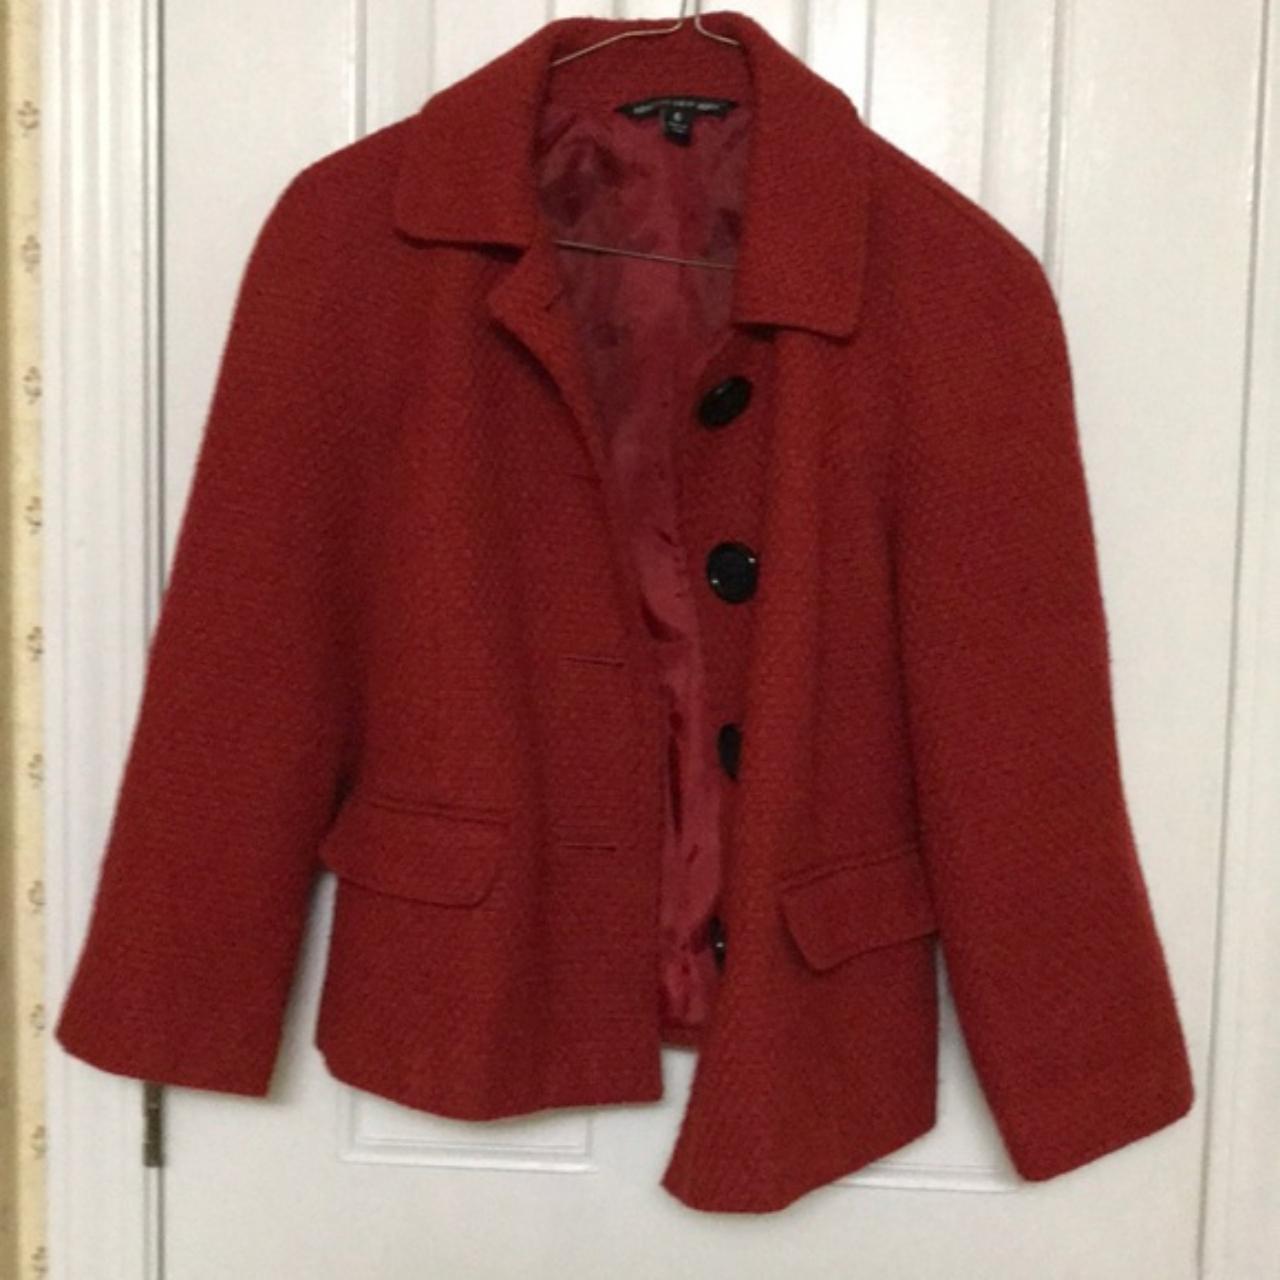 Women's Red and Black Coat (3)